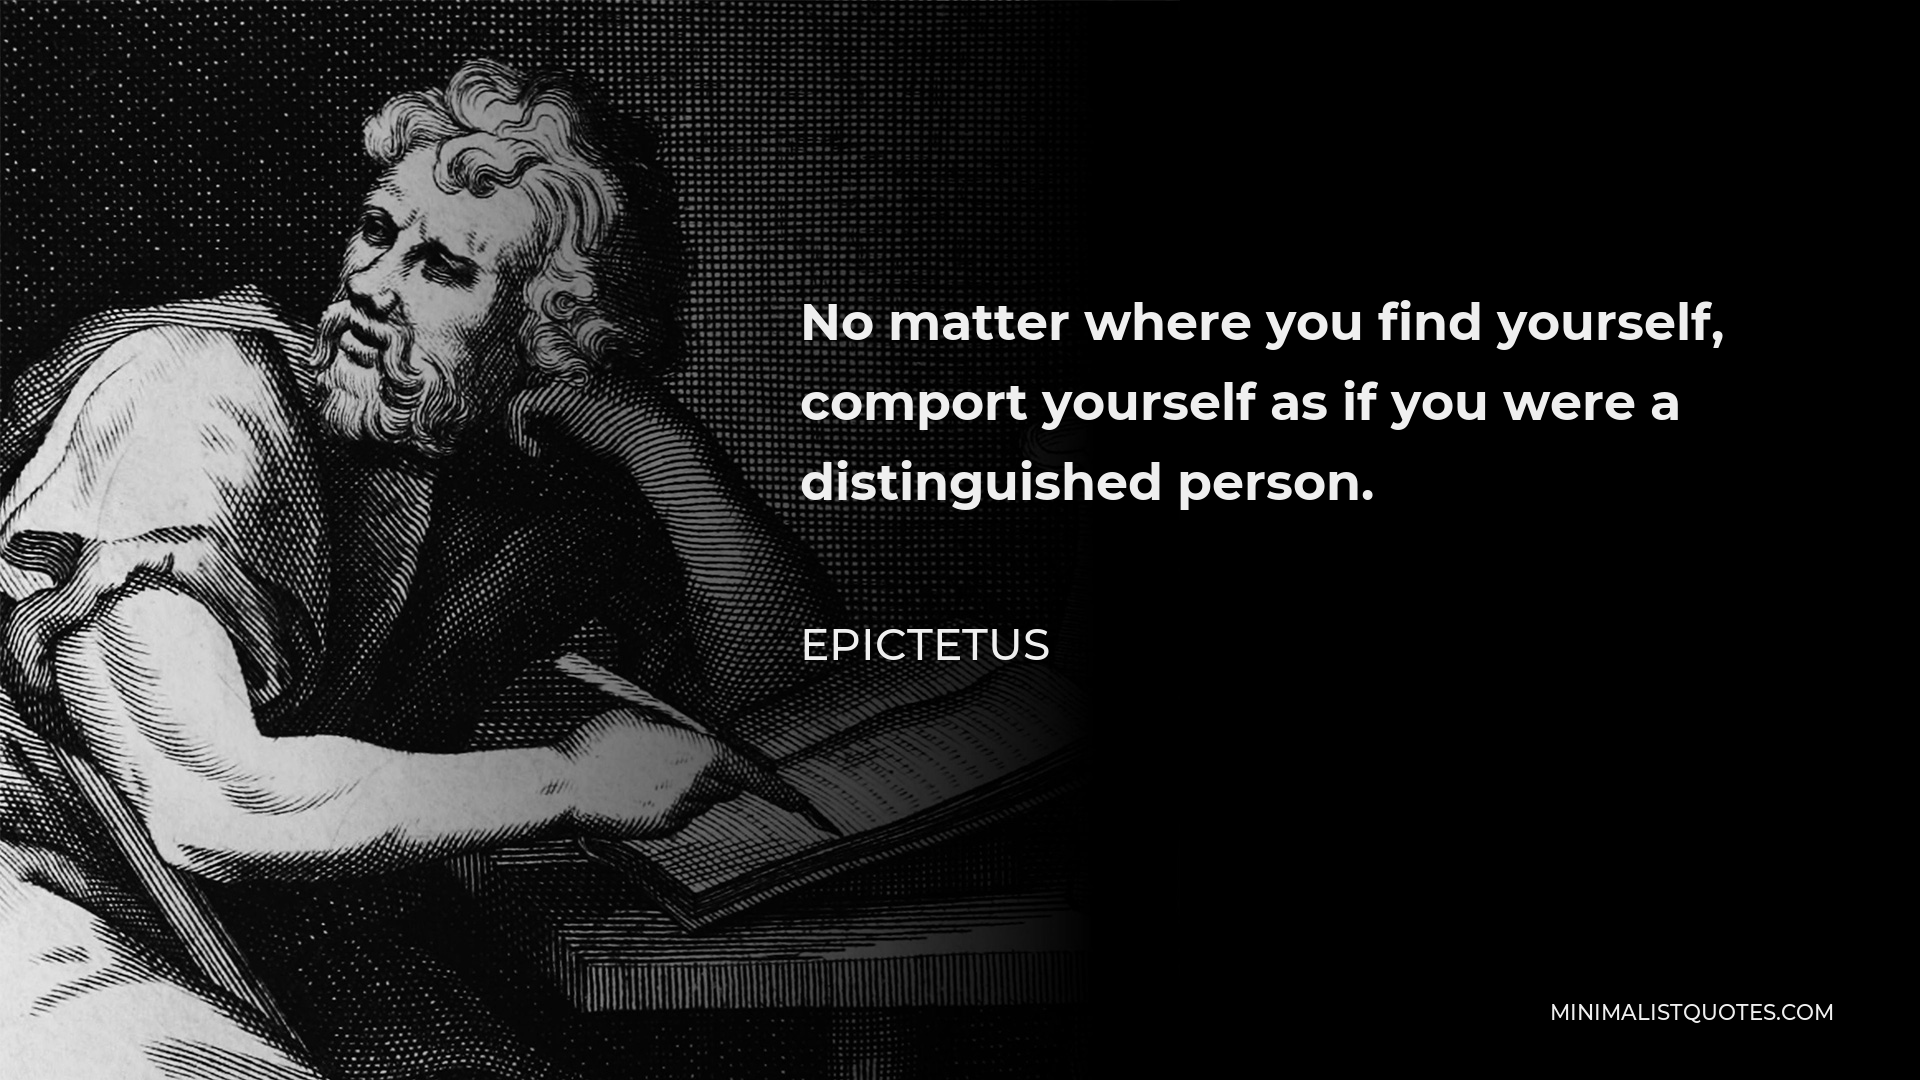 Epictetus Quote - No matter where you find yourself, comport yourself as if you were a distinguished person.